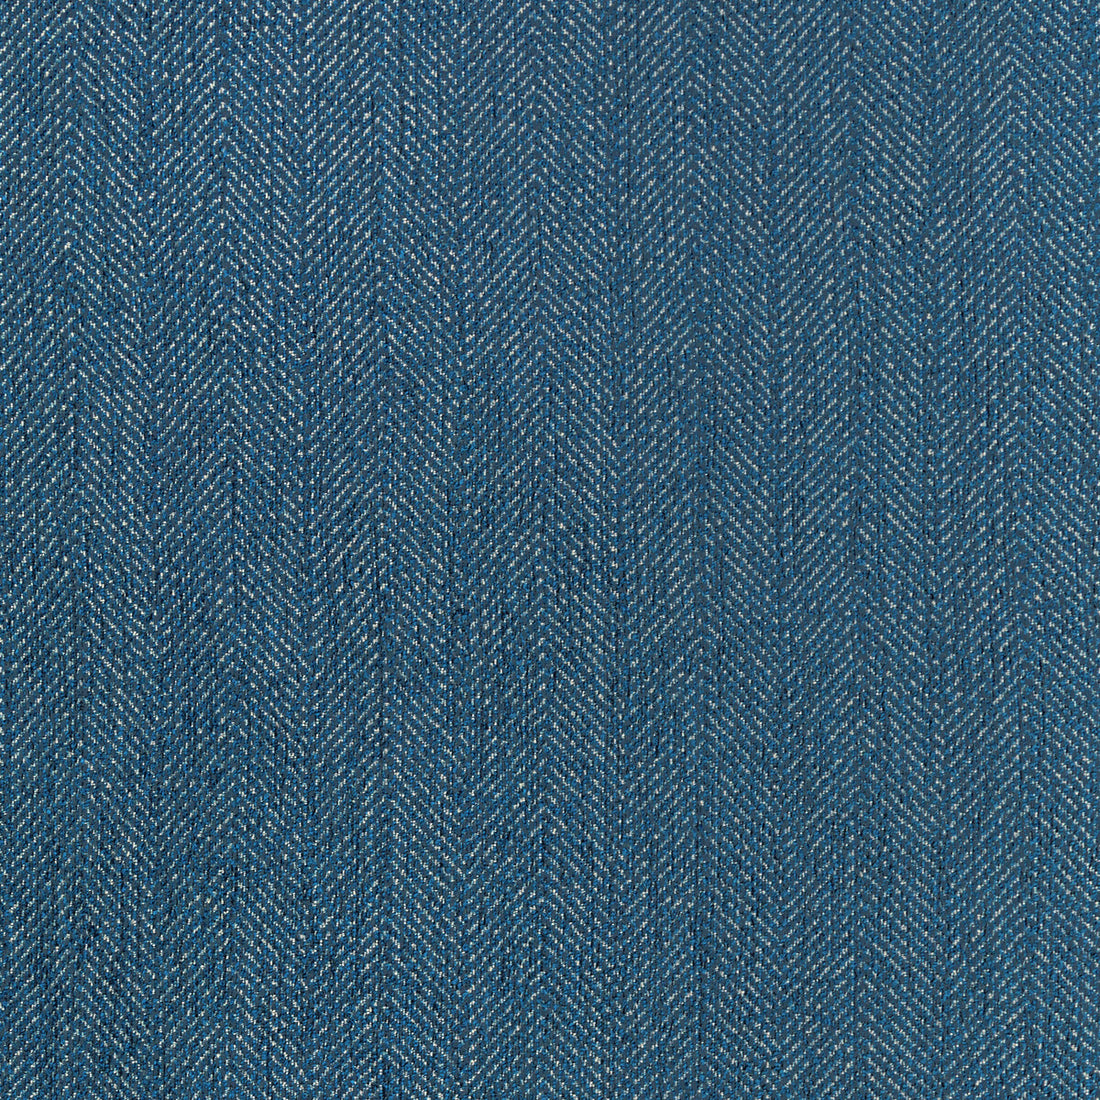 Healing Touch fabric in blue moon color - pattern 36389.5.0 - by Kravet Design in the Crypton Home - Celliant collection